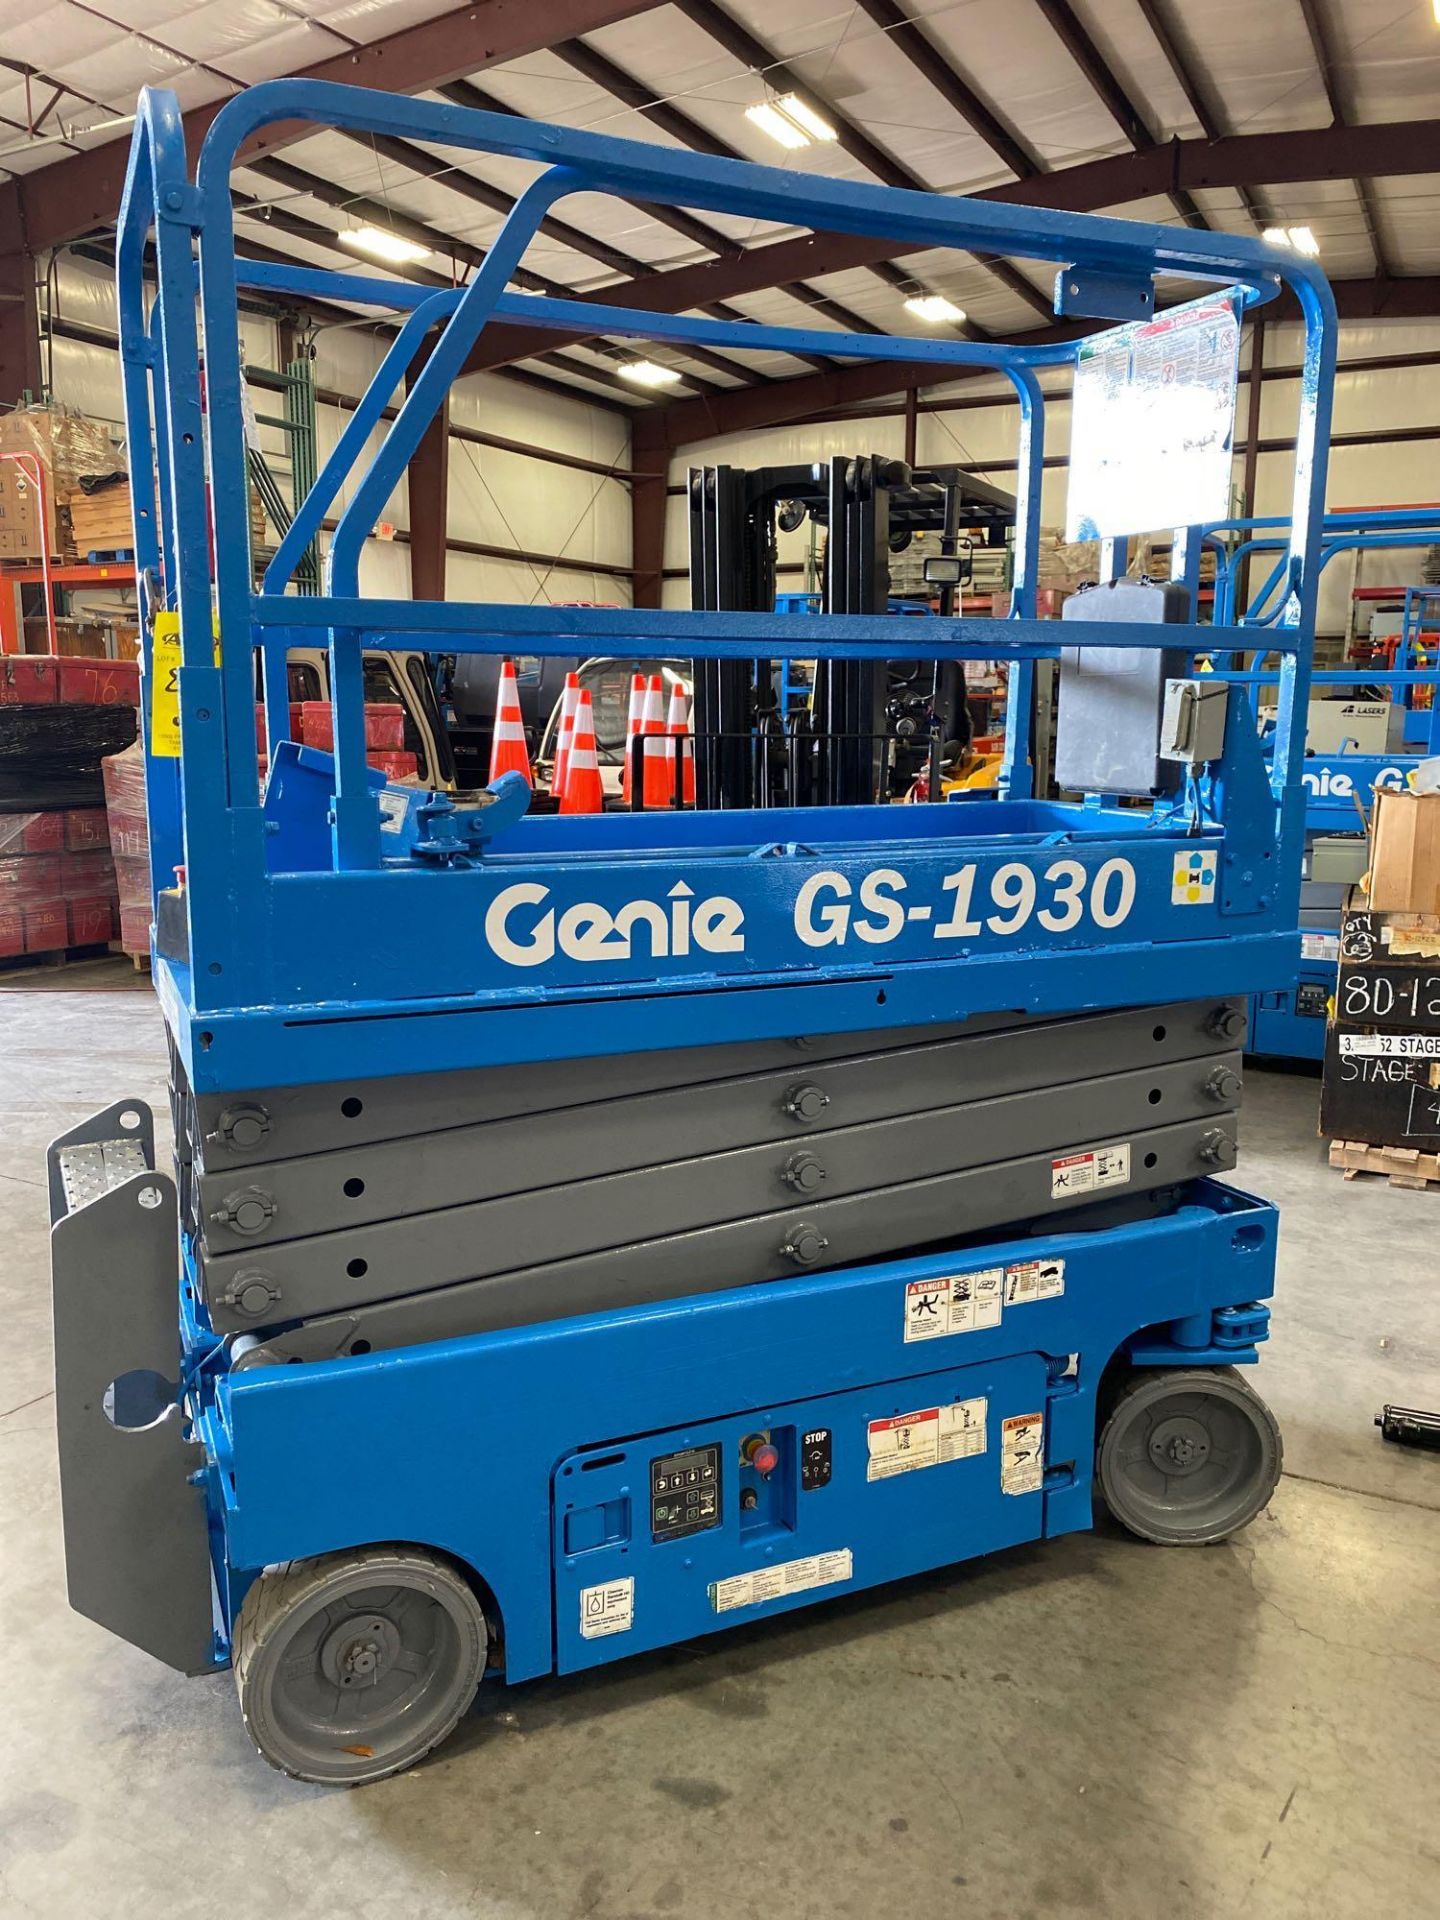 2013 GENIE GS-1930 ELECTRIC SCISSOR LIFT, 110 HOURS SHOWING, BUILT IN BATTERY CHARGER - Image 4 of 6